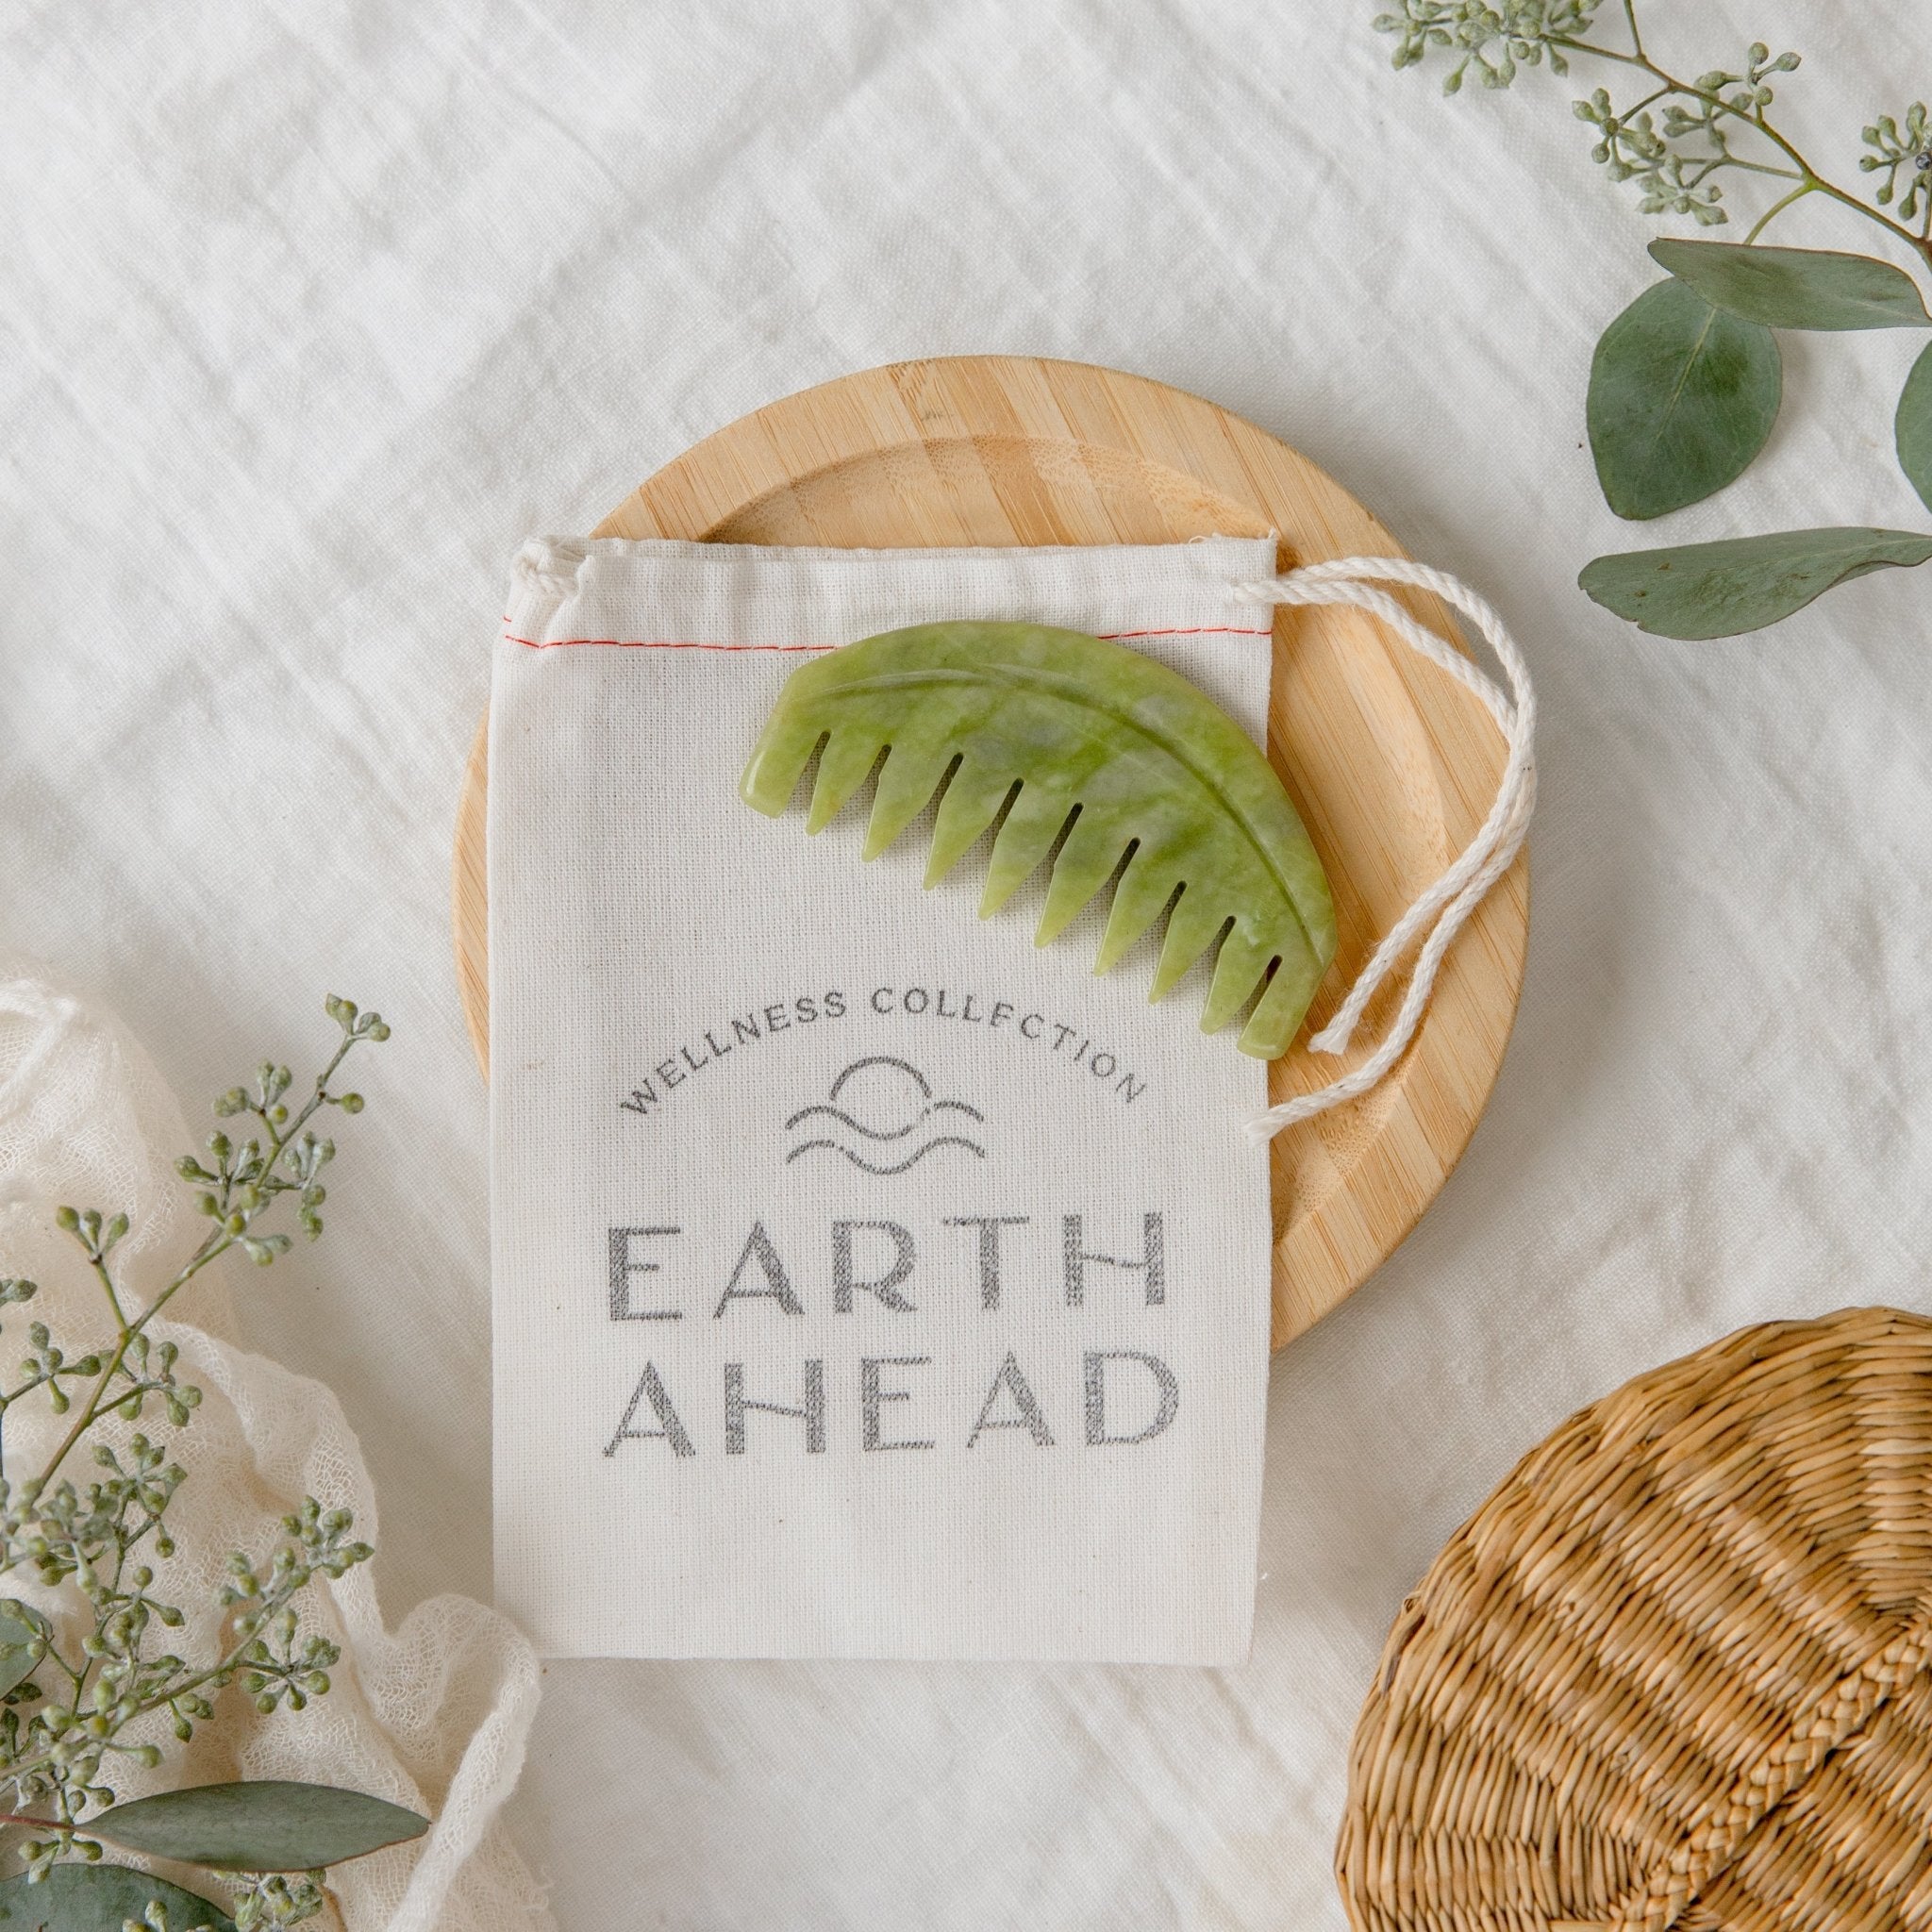 Jade Hair Comb and Scalp Massager - Earth Ahead